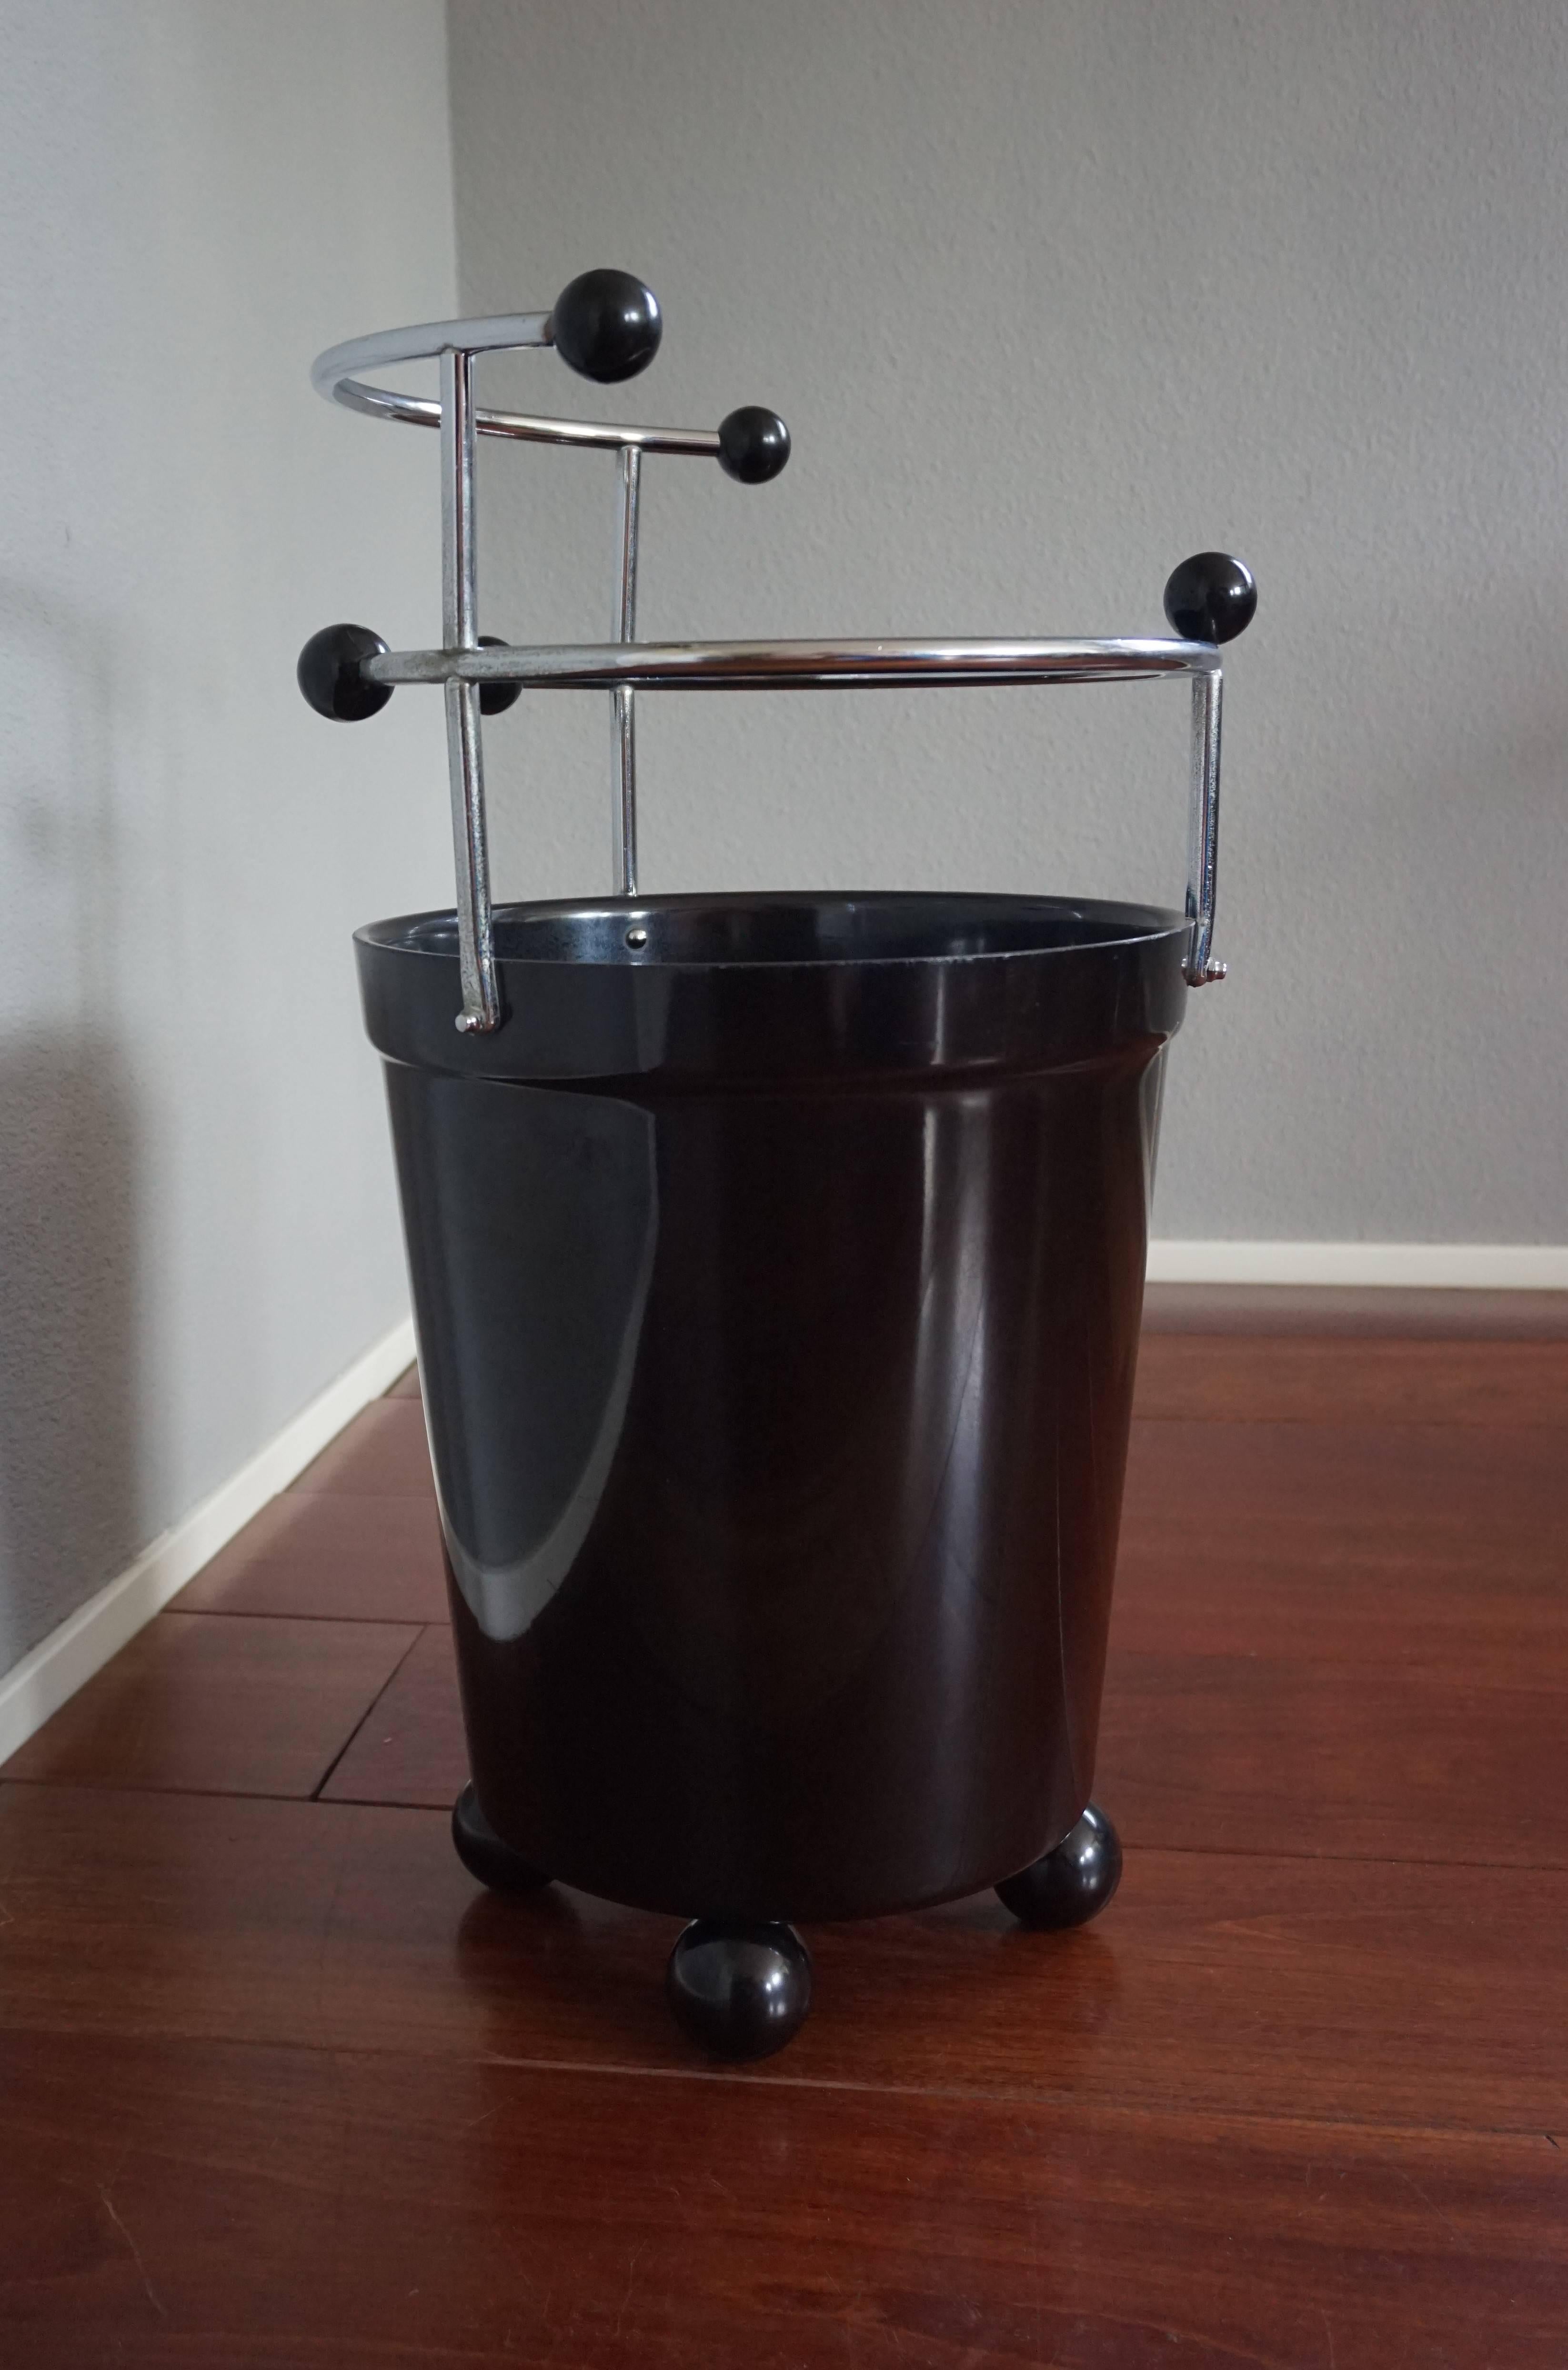 Extremely rare and possibly unique stand.

This impressive and inspiring European Art Deco umbrella and stick stand from the 1930s is an absolute joy to own, use and look at. The beautiful and thick, black bakelite bucket rests on four solid